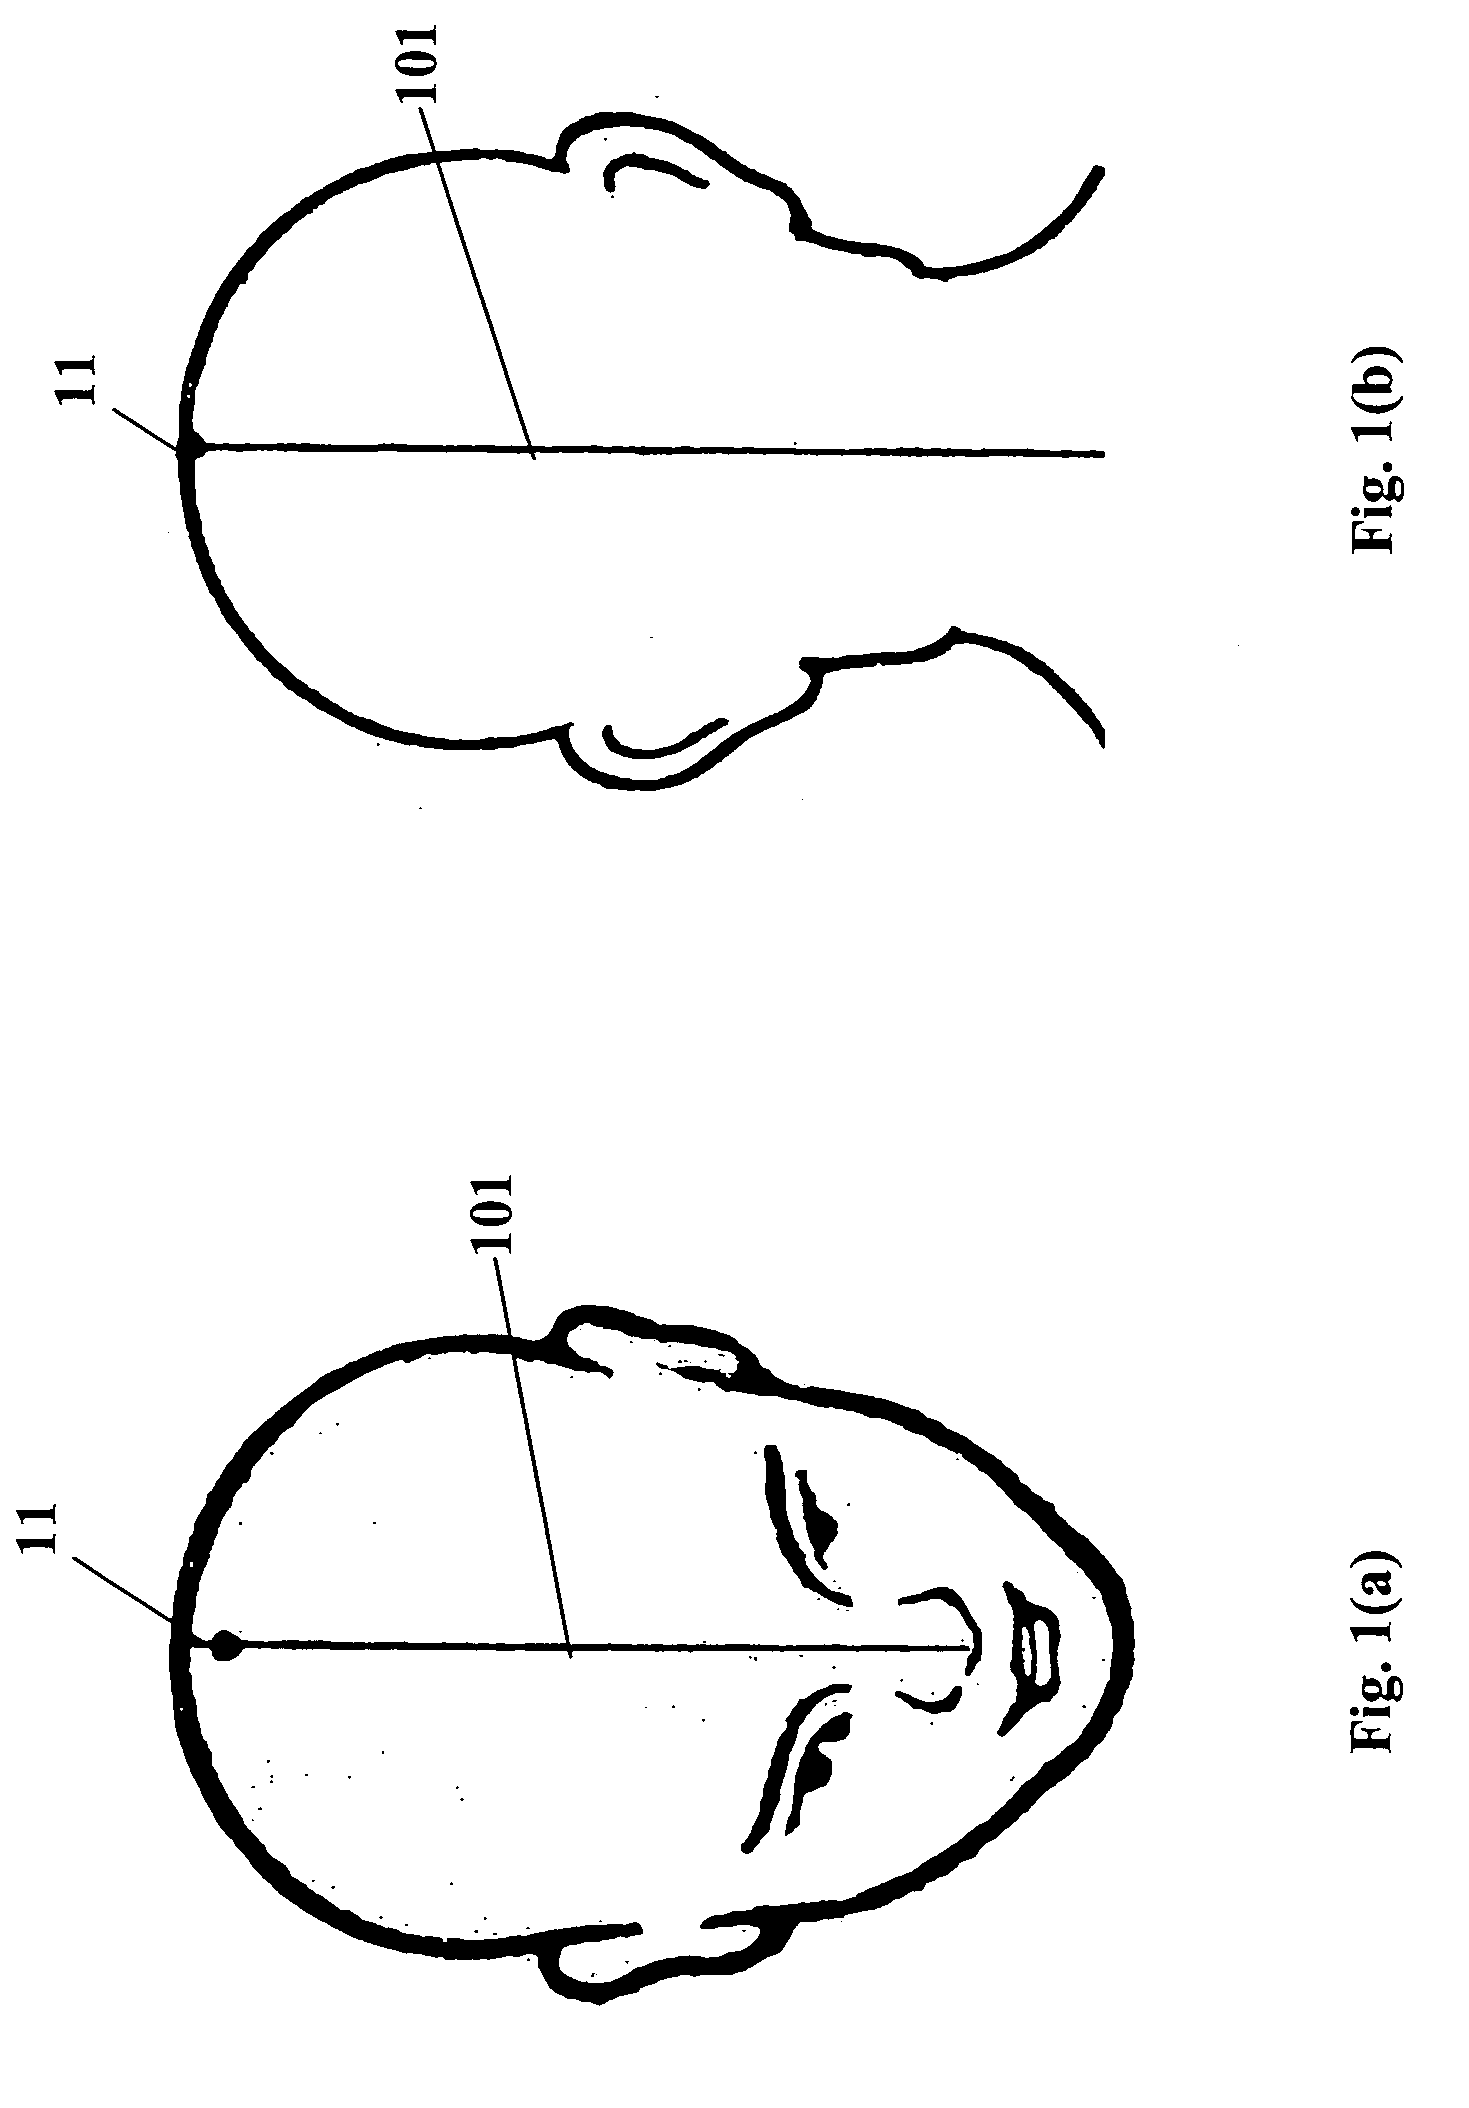 Acupressure device for treating insomnia